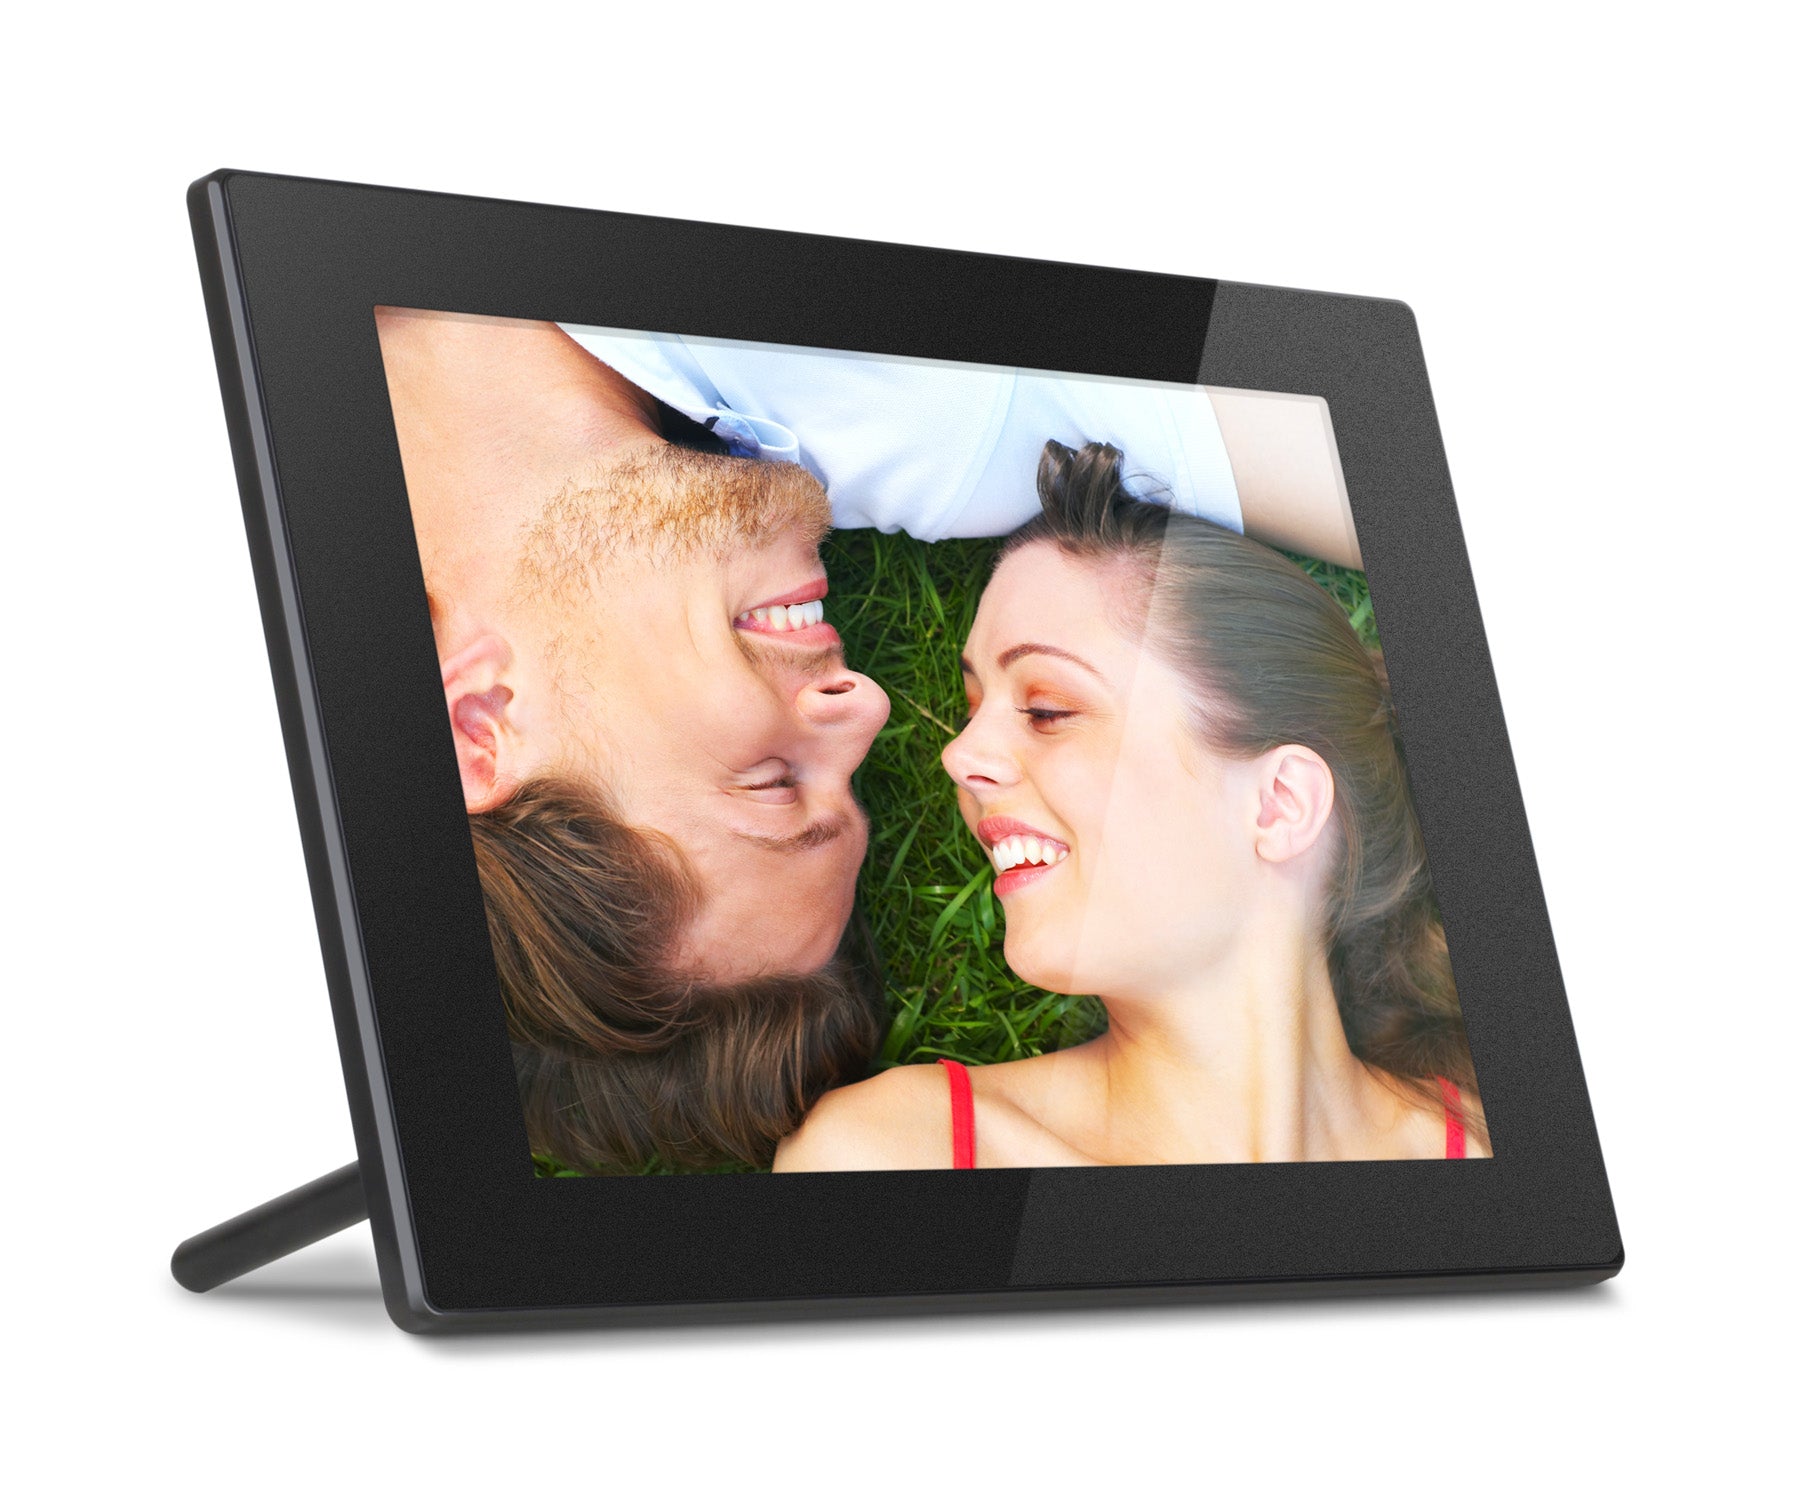 Pix-Star 15 inch WiFi Digital Picture Frame, Share Videos and Photos Instantly by Email or App, Motion Sensor, IPS Display, Effortless One Minute Setu - 3